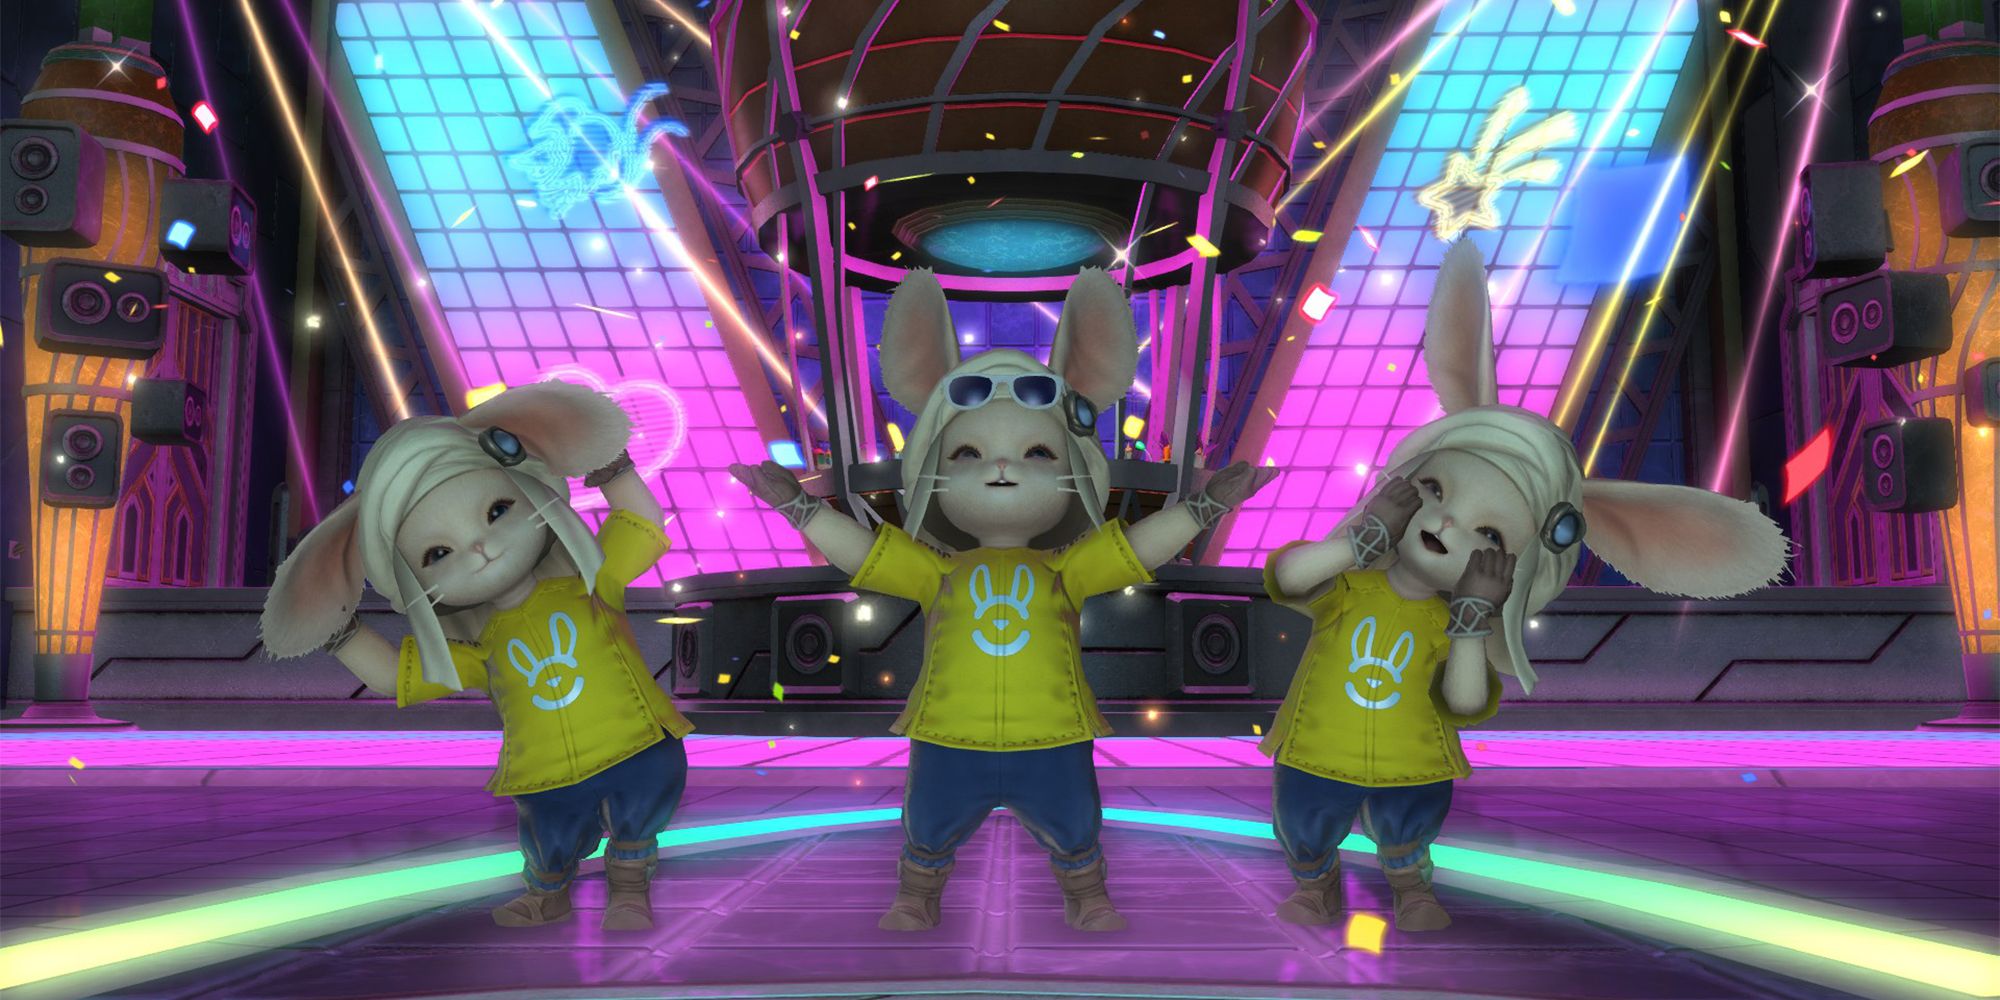 dreamingway, managingway, and coiningway dressed up for the loporrit tribal quest nightclub